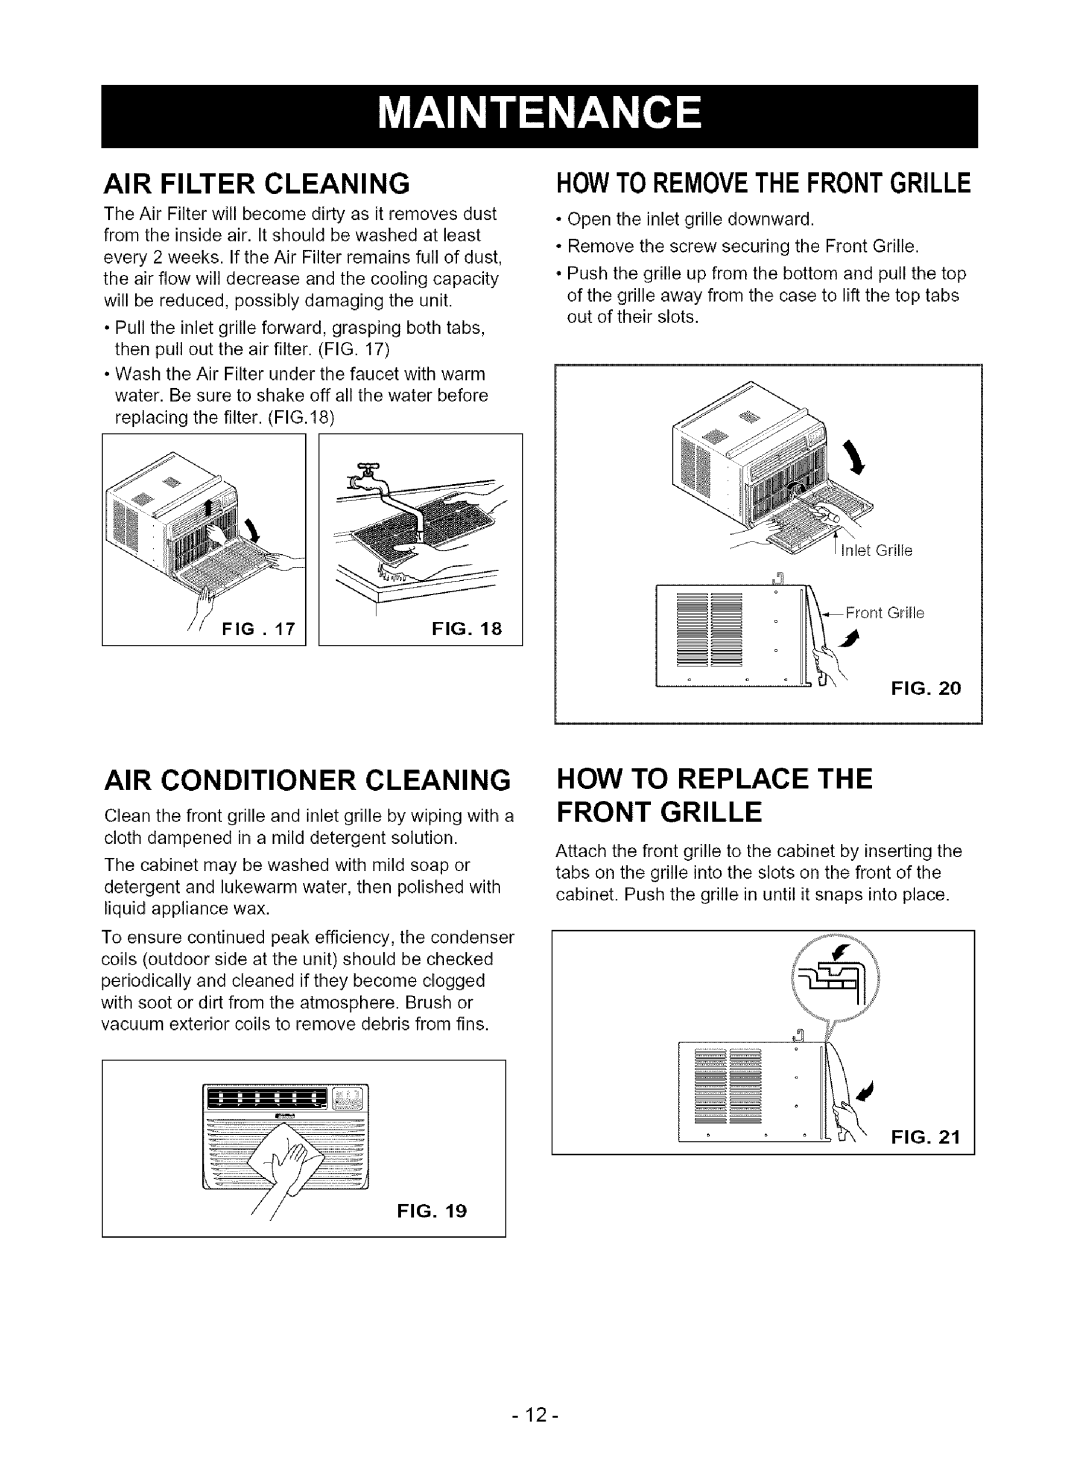 Kenmore 580.75080 owner manual Air Filter Cleaning, Air Conditioner Cleaning, Howto Removethe Frontgrille 